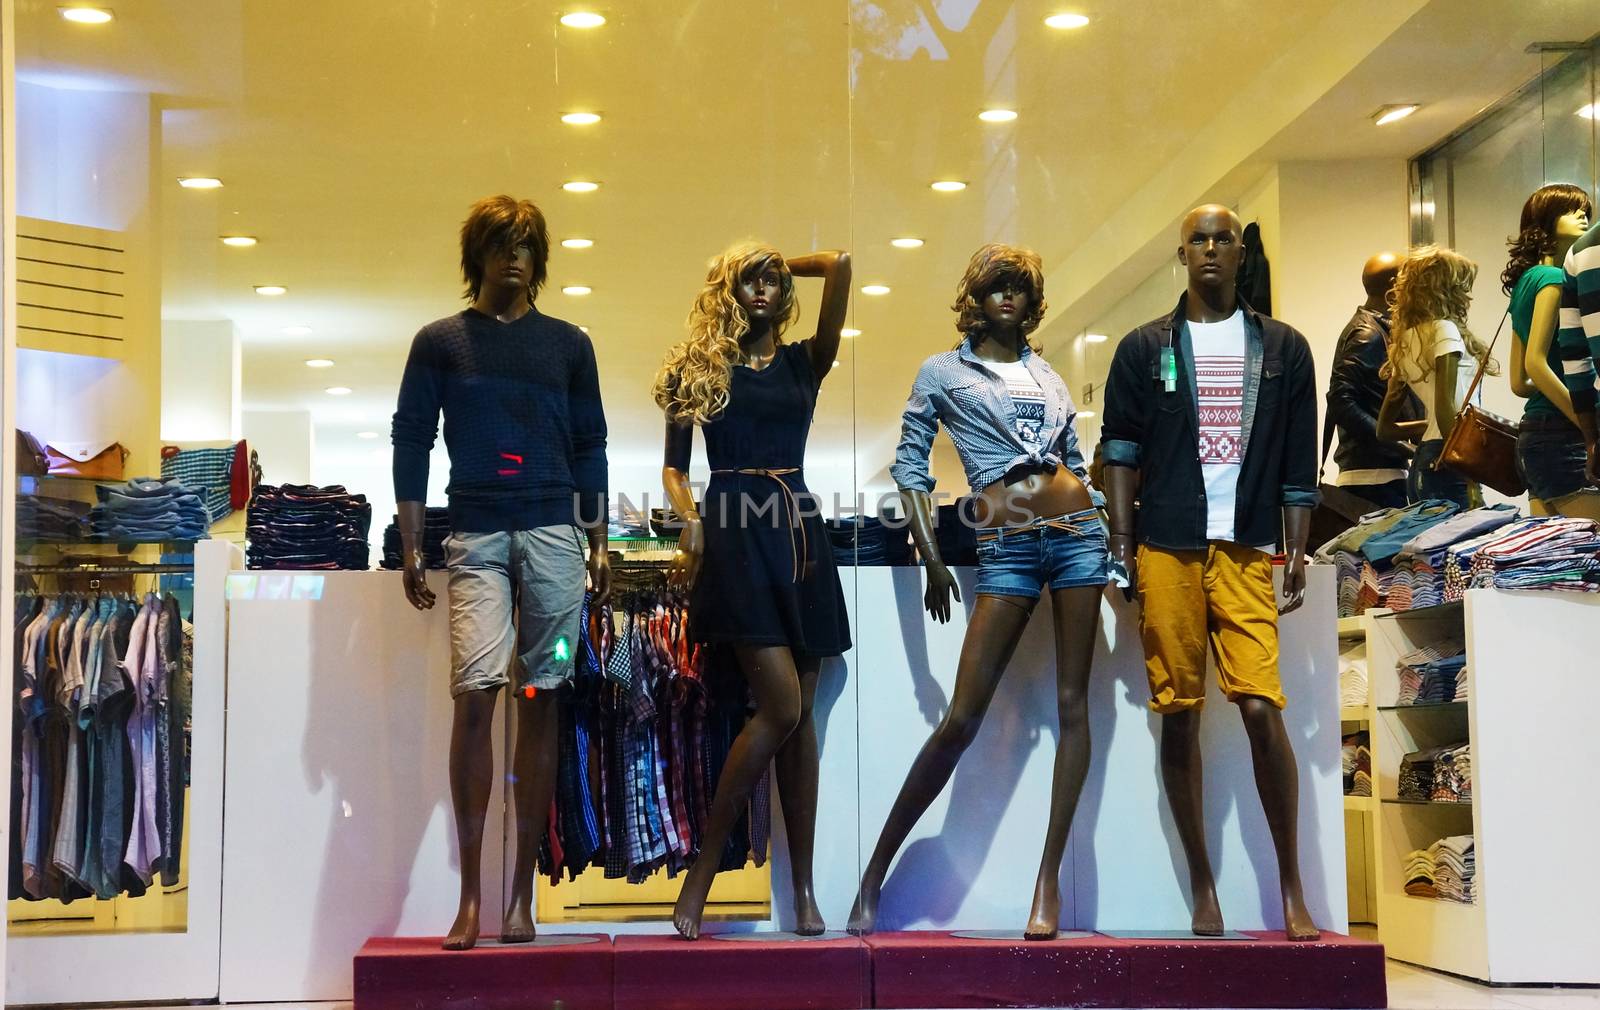 HO CHI MINH CITY, VIET NAM- OCT 5: Group of manequin wear fashion clothing, standing at window of dress retail mall, modern suit of garments market, Vietnam, Oct 5, 2014